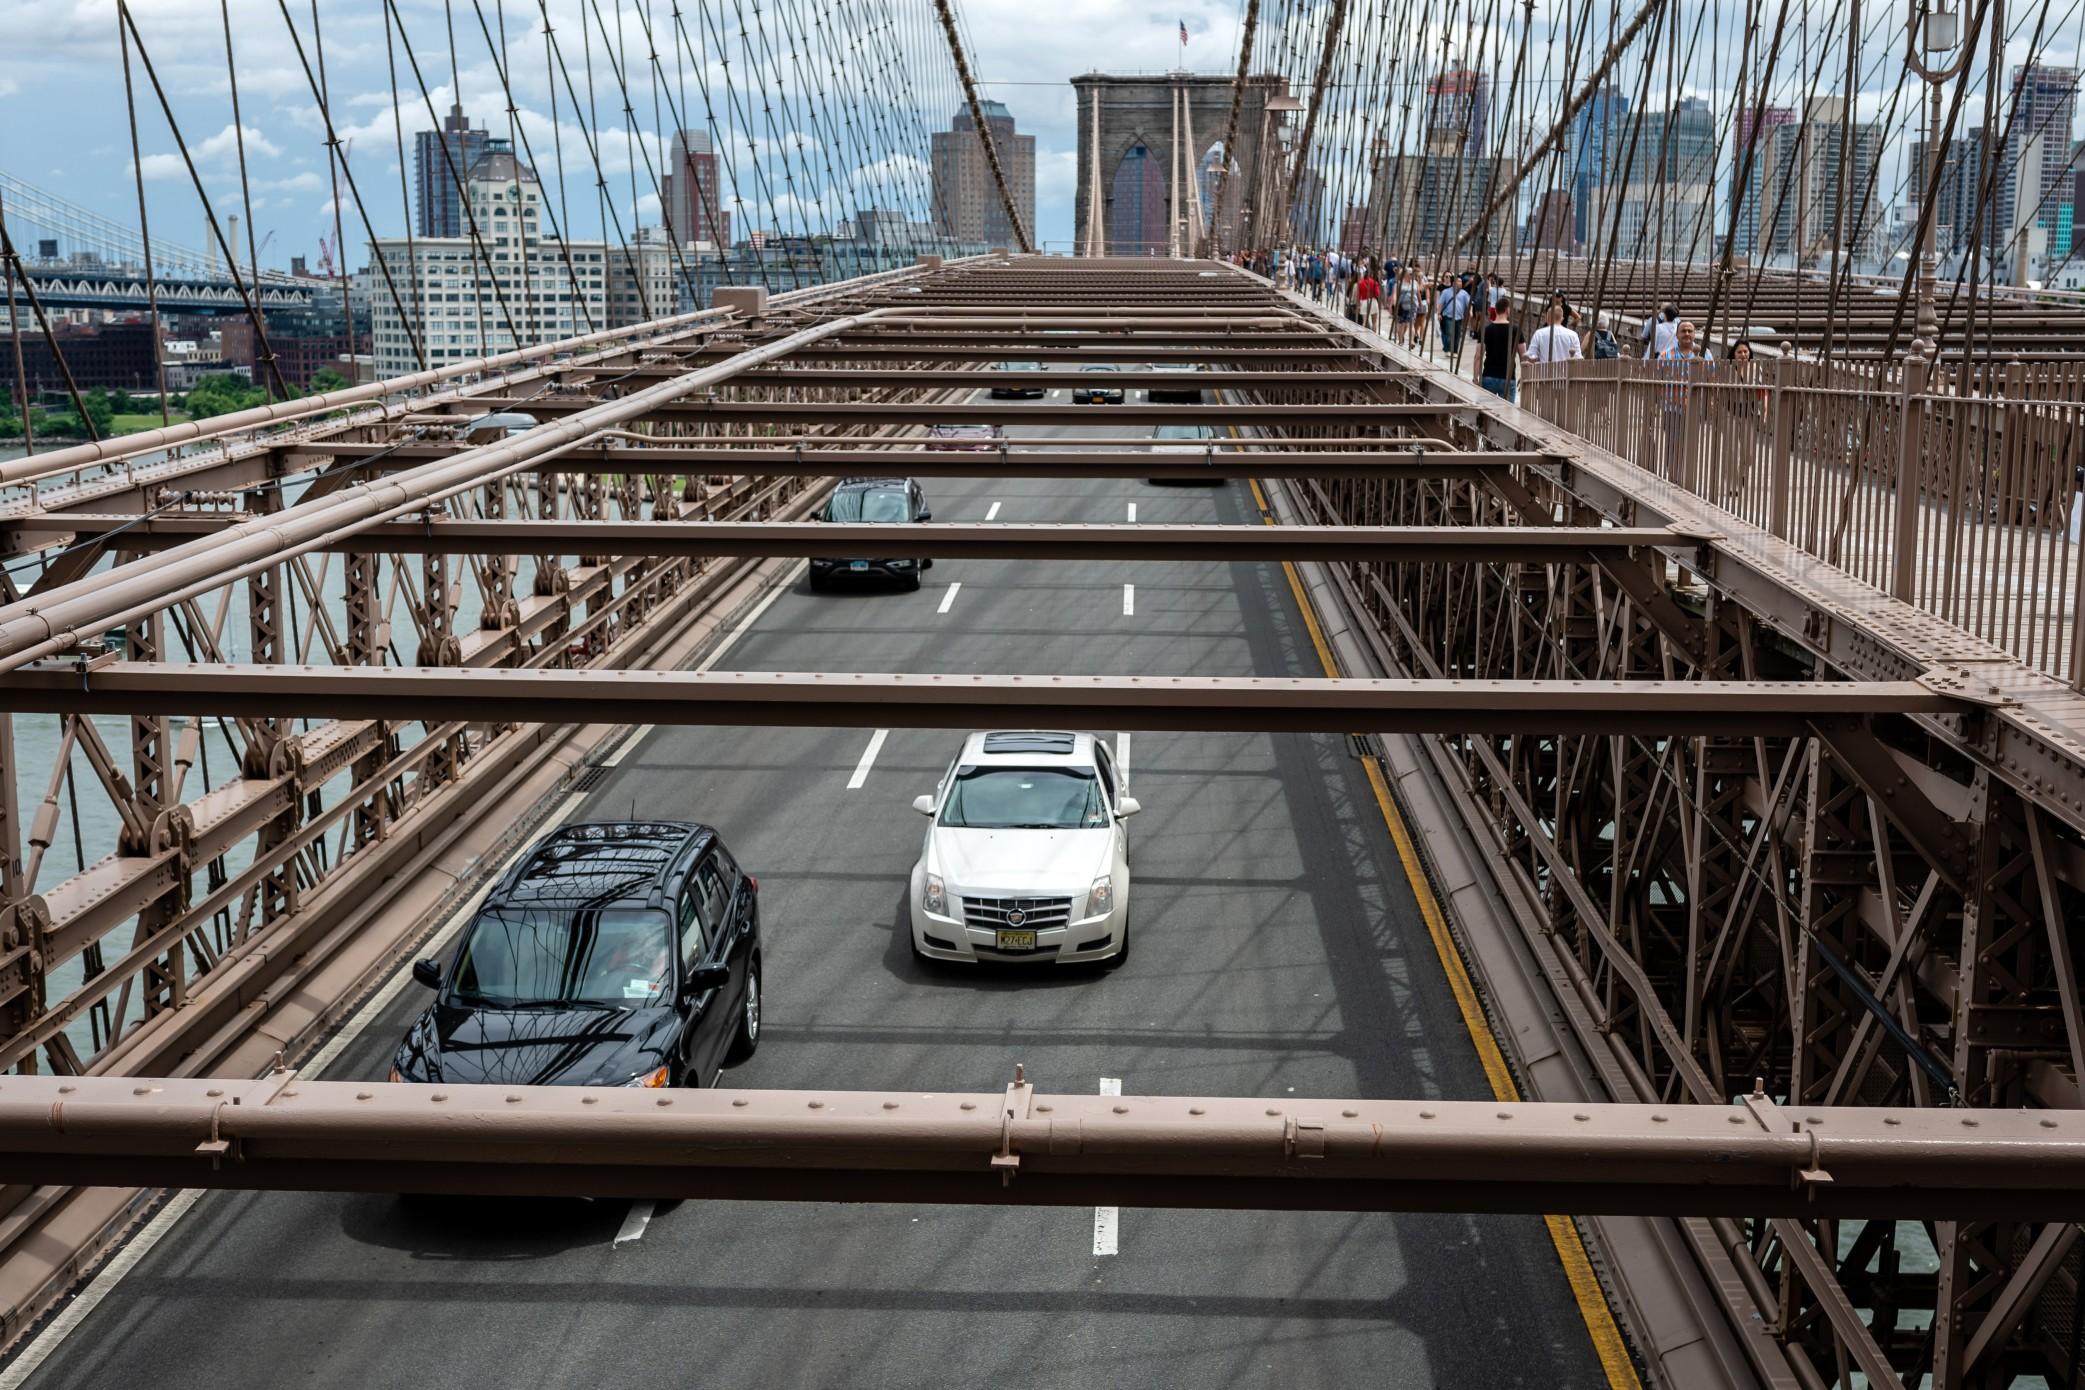 New Yorkers seem to be overpaying for car insurance.